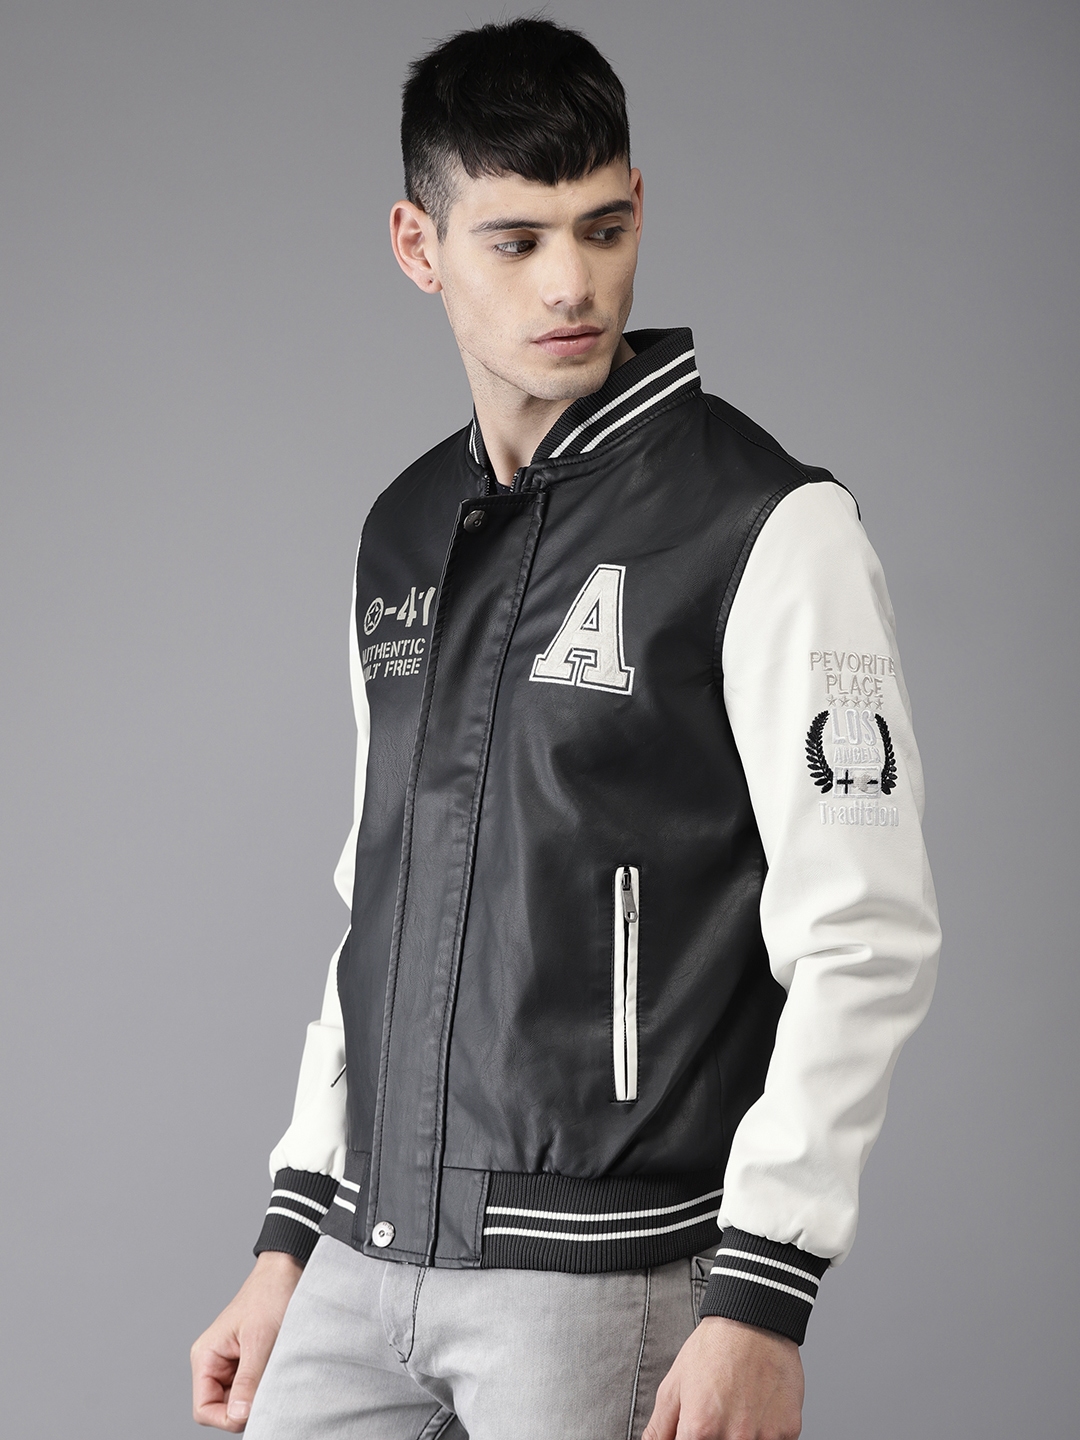 Share 96+ myntra jacket for mens super hot - in.thdonghoadian